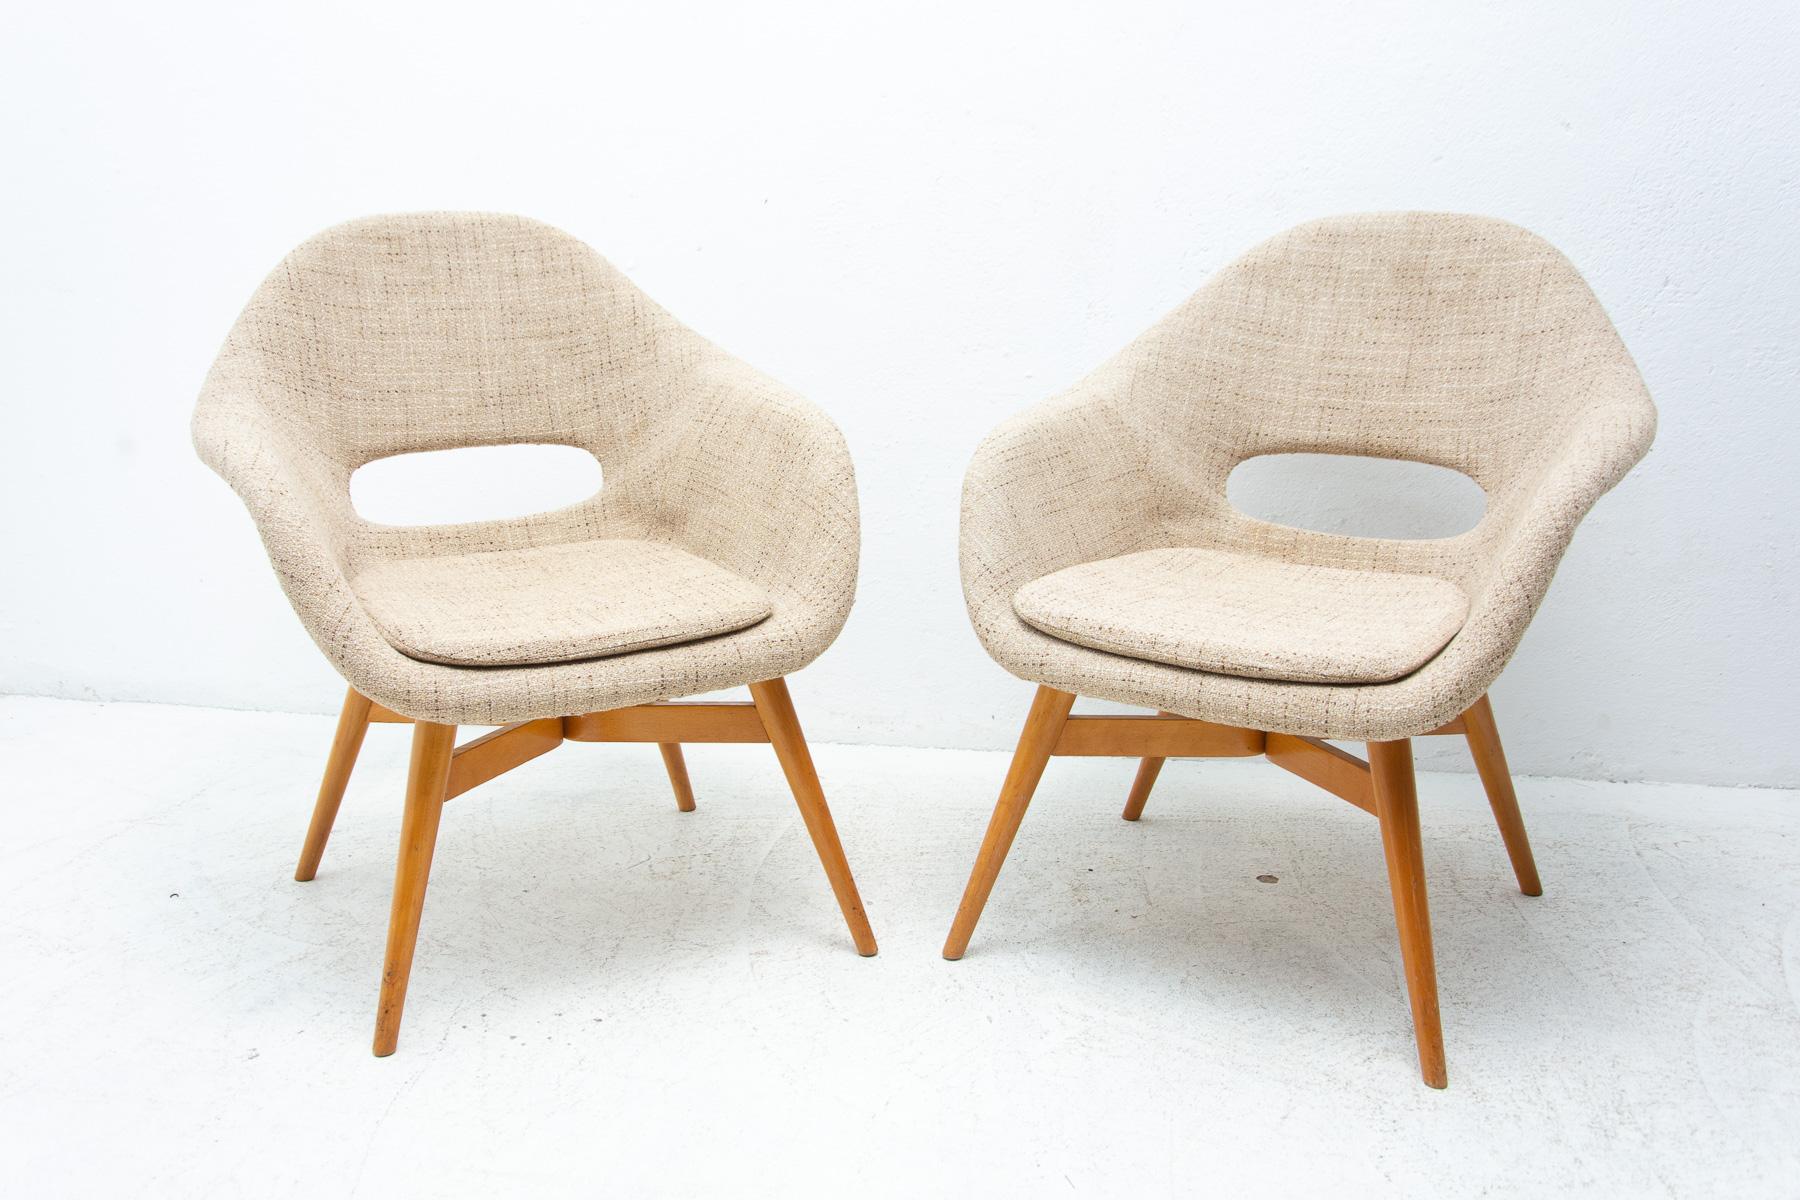 These shell lounge chairs are an interesting example of Czechoslovak mid-century furniture design. They were designed by Miroslav Navratil or František Jirák. They are associated with the “Brussels period” and world-renowned EXPO 58.
The chairs has